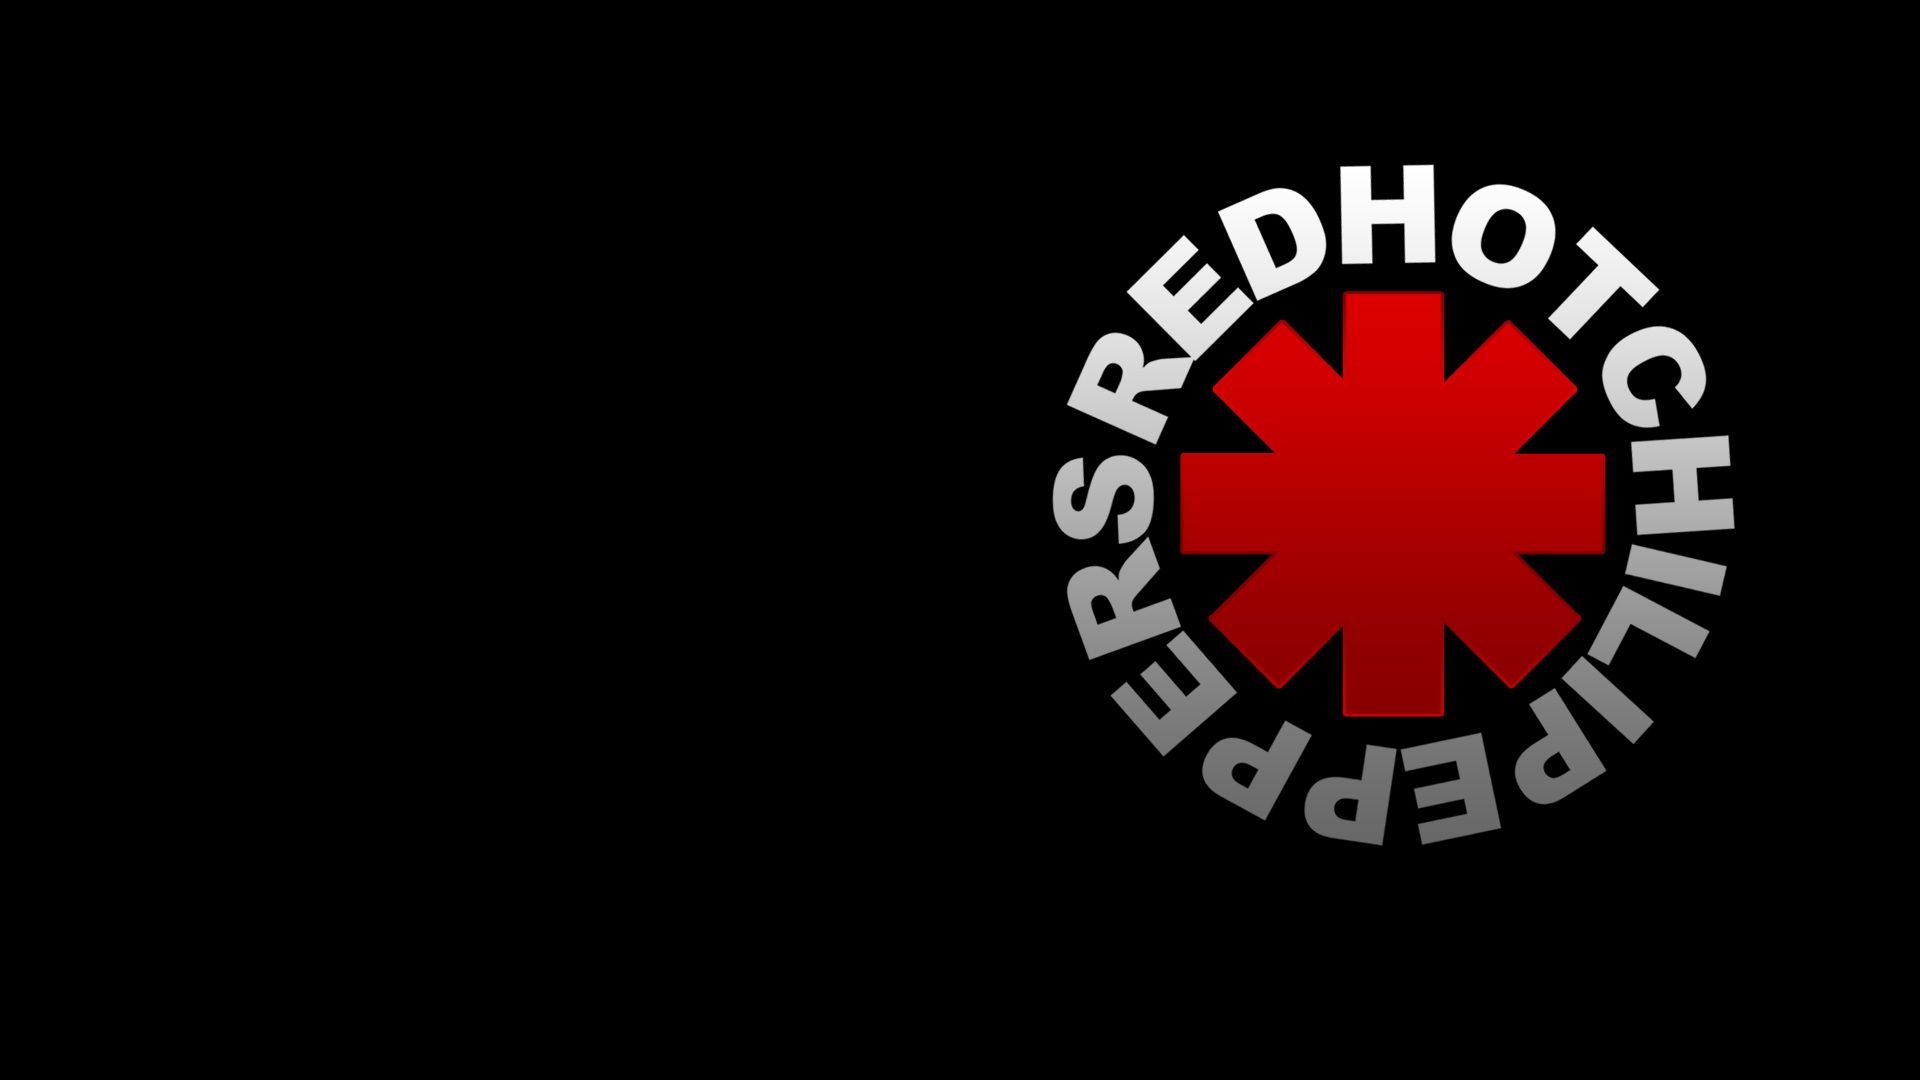 23 Red Hot Chili Peppers HD Wallpapers | Backgrounds - Wallpaper Abyss